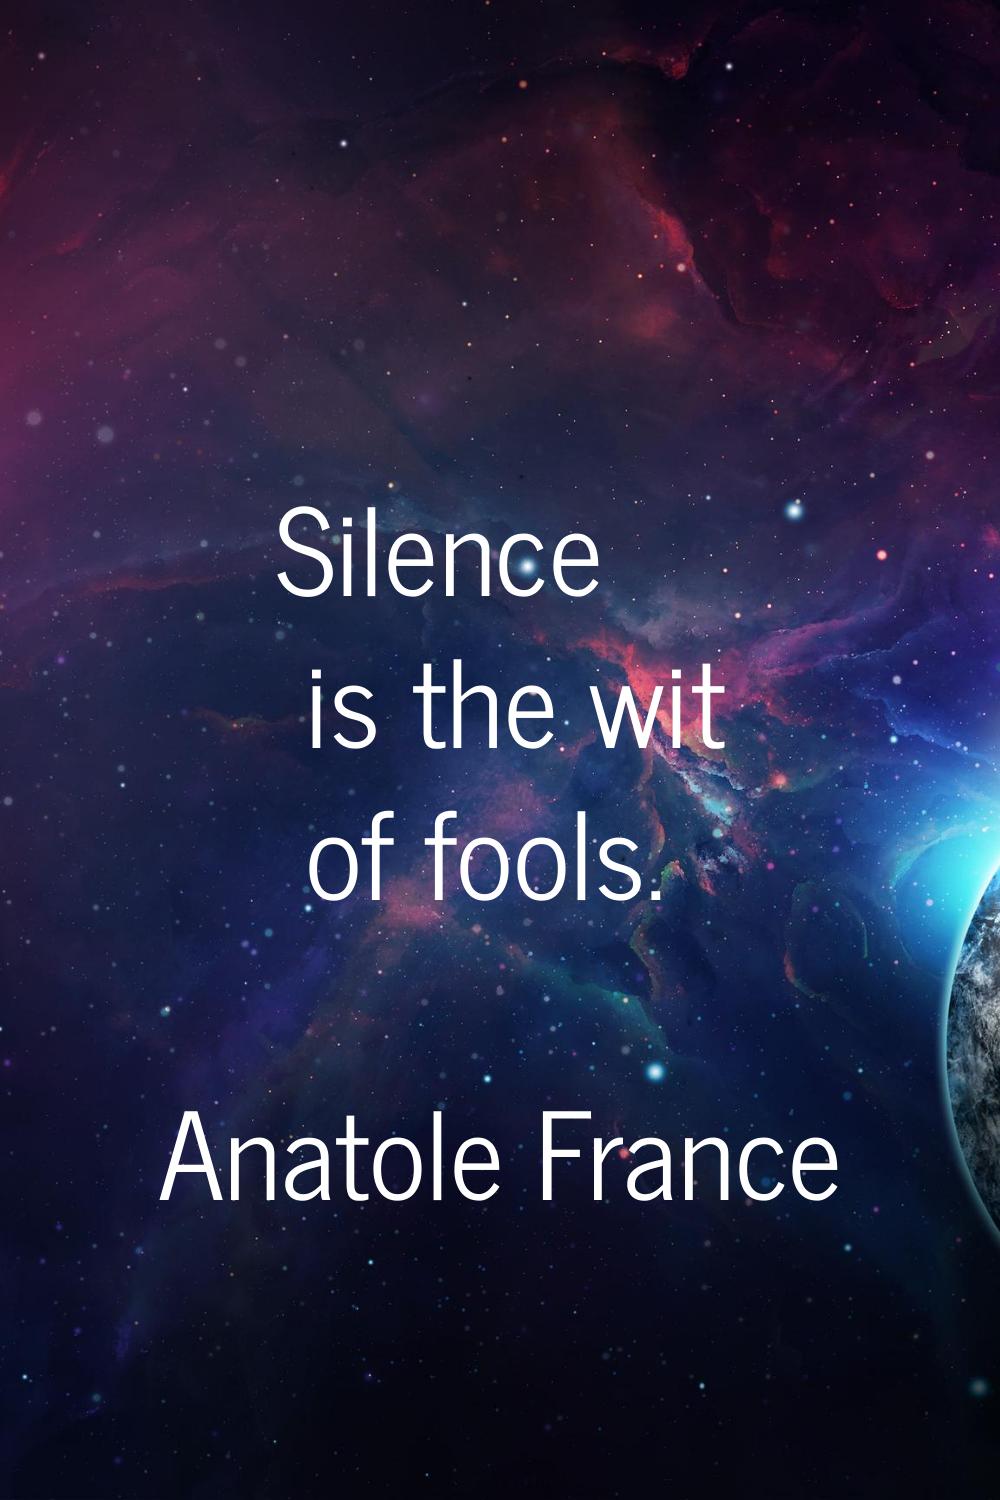 Silence is the wit of fools.